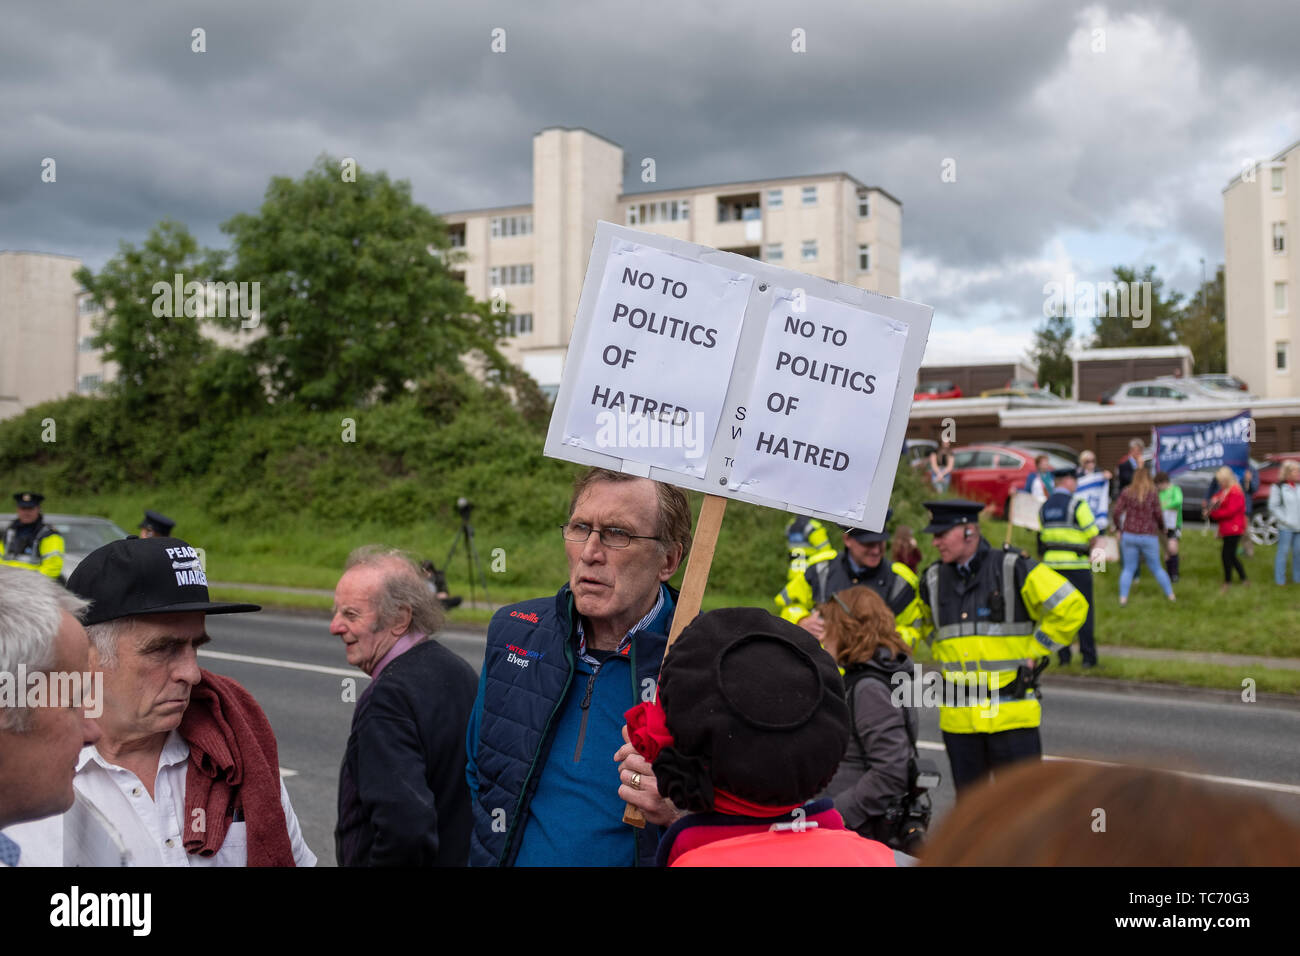 Shannon, Ireland, June. 5, 2019: PA man with a placard protesting against the Donald Trump visit at Shannon Airport, Ireland 2 today Stock Photo